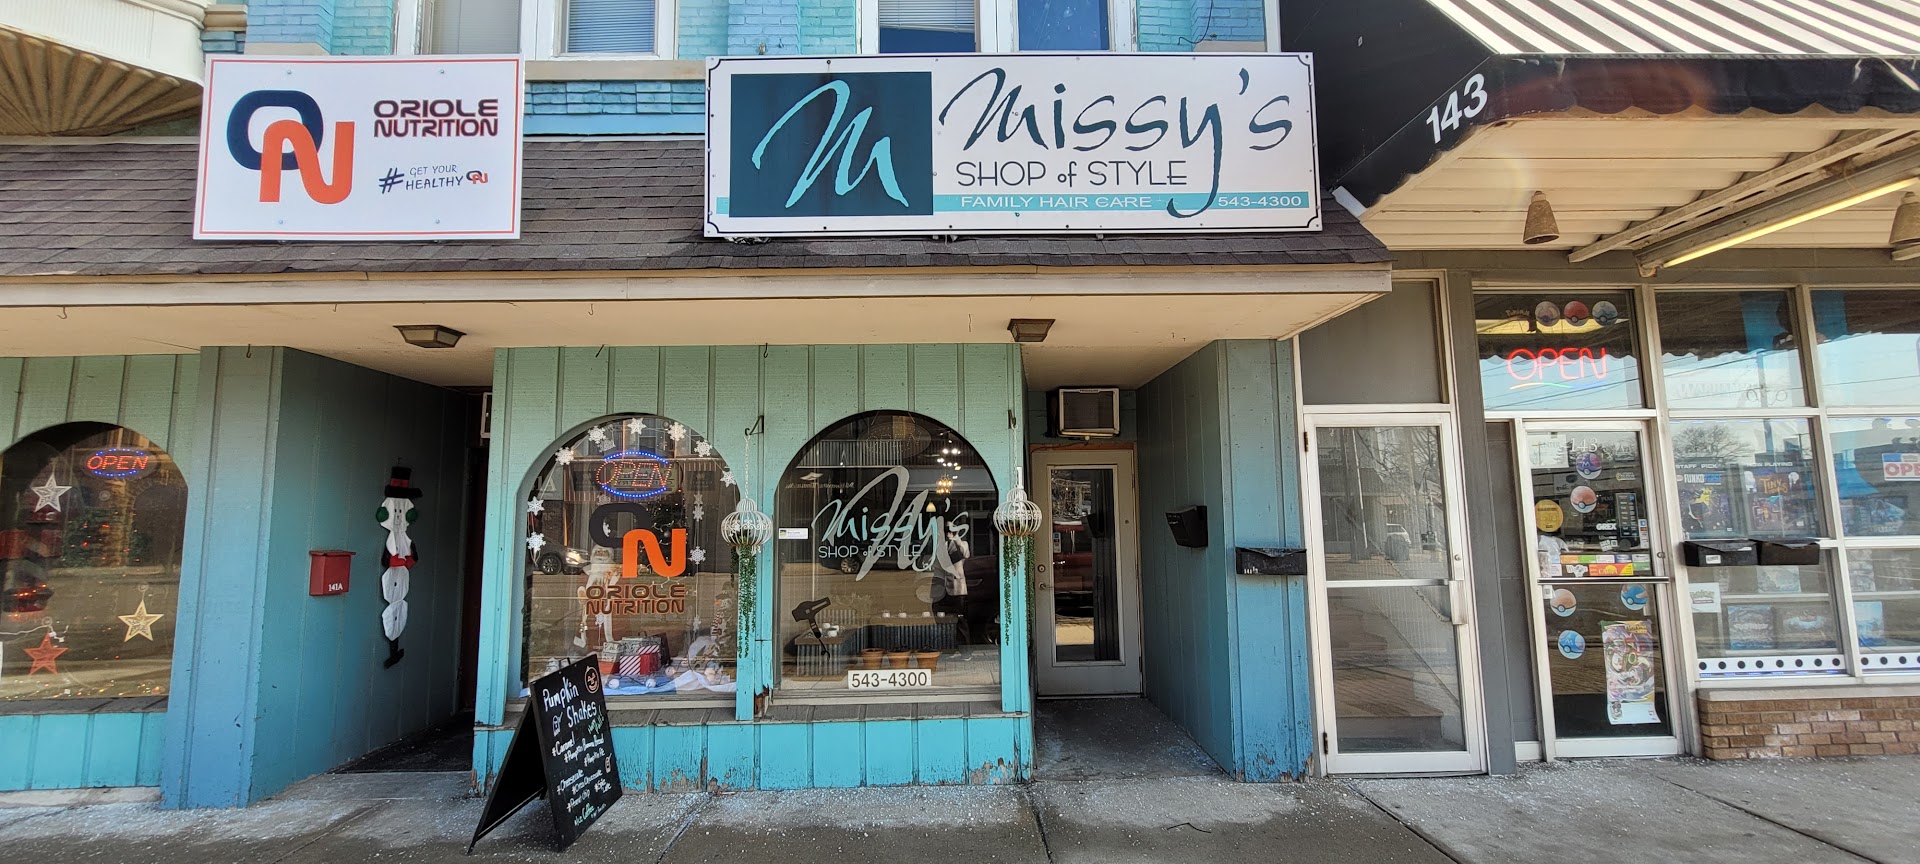 Missy's Shop of Style